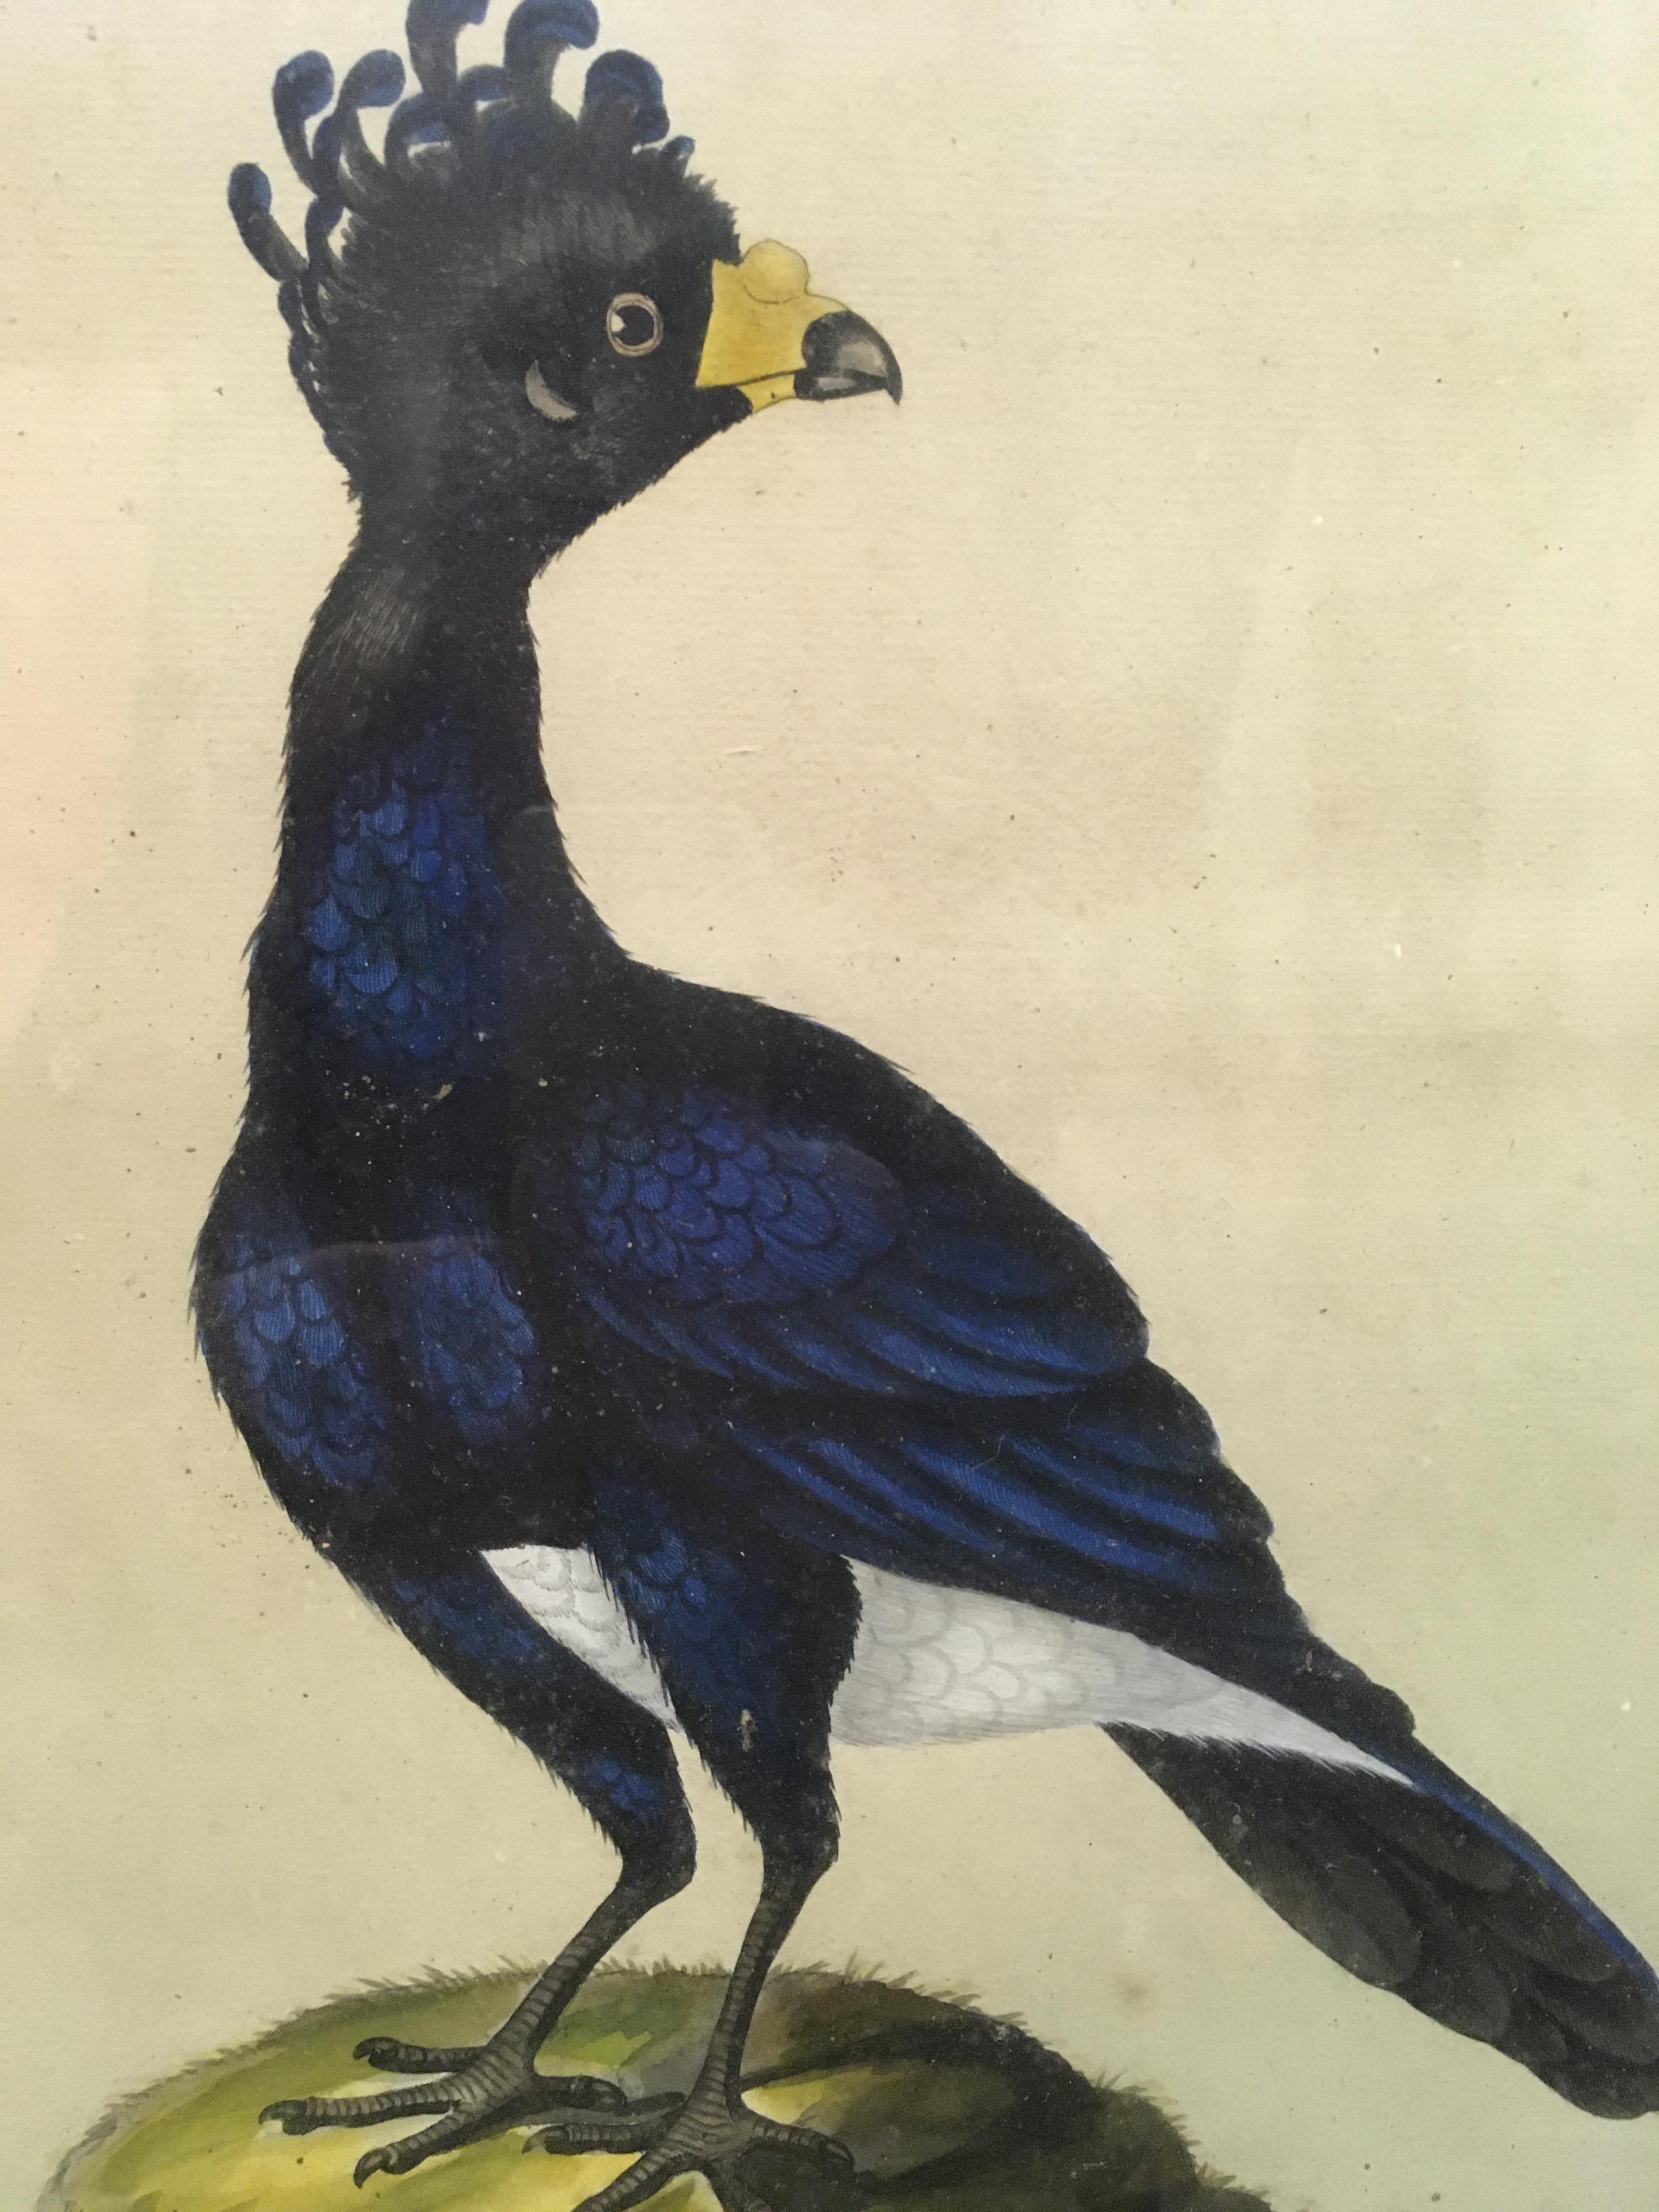 ATTRIBUTED TO WILLIAM HAYES (1729-1799) "Curasso male" watercolour, - Image 2 of 2